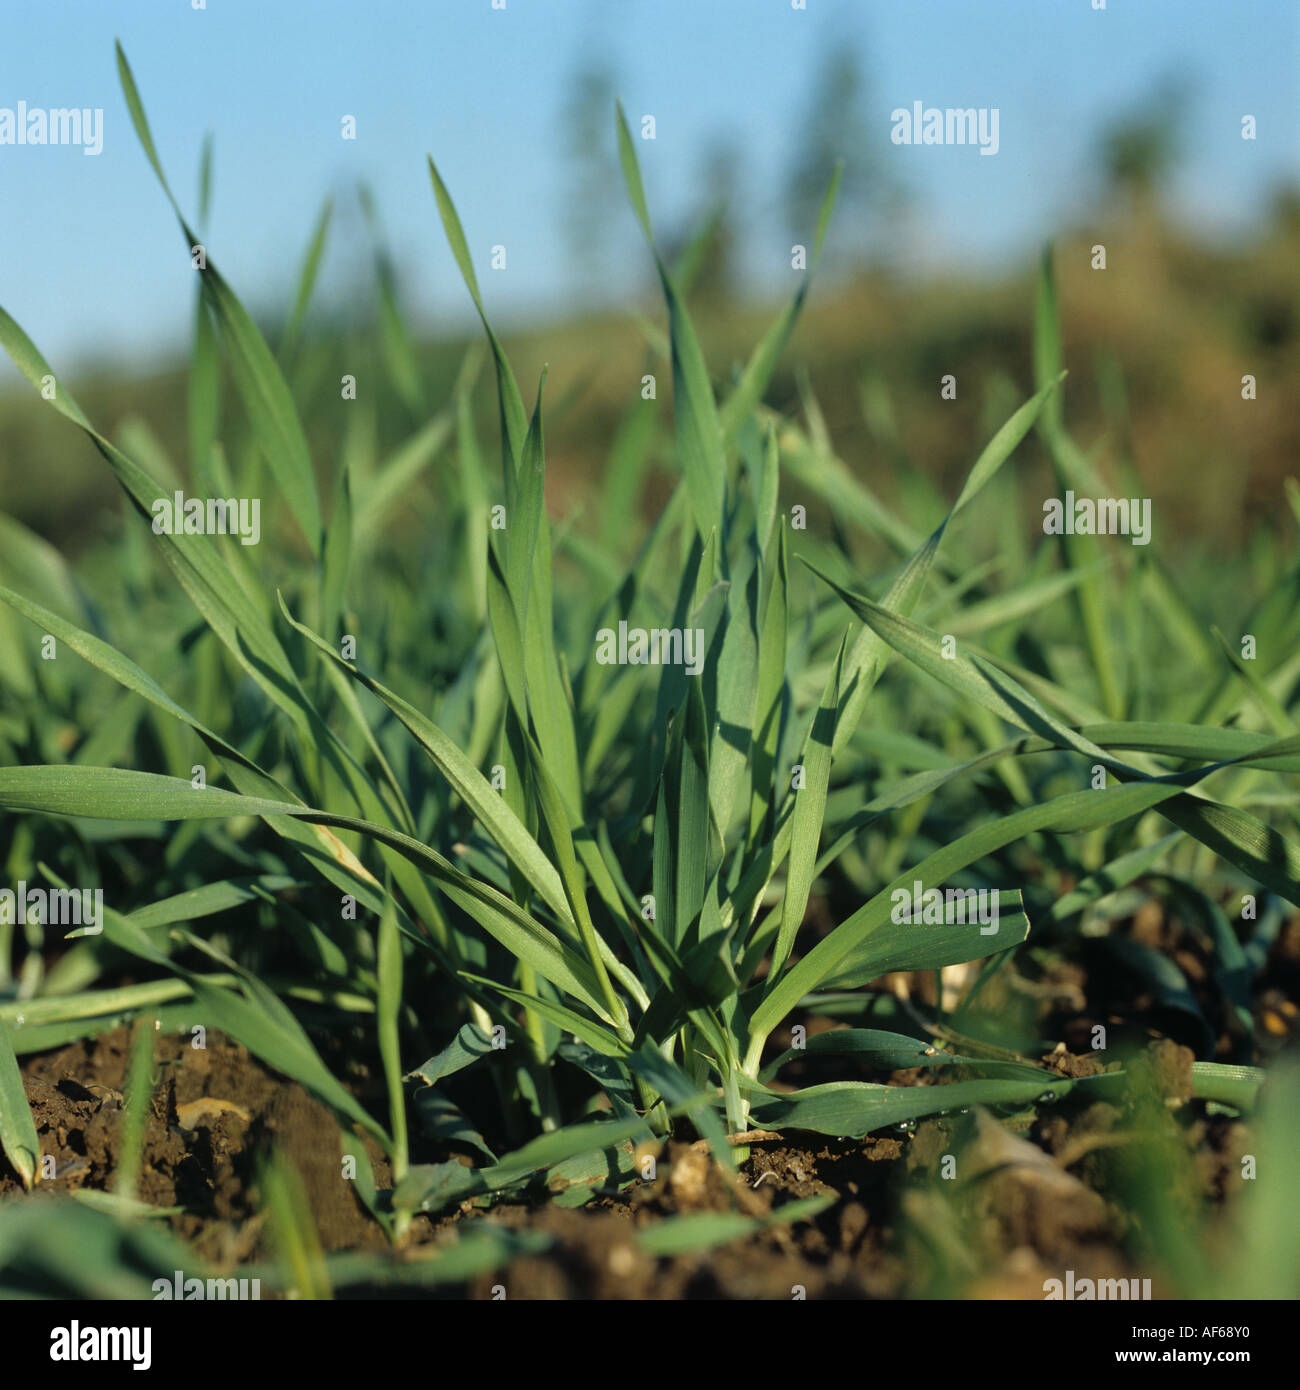 Young tillering barley plants viewed from ground level Stock Photo